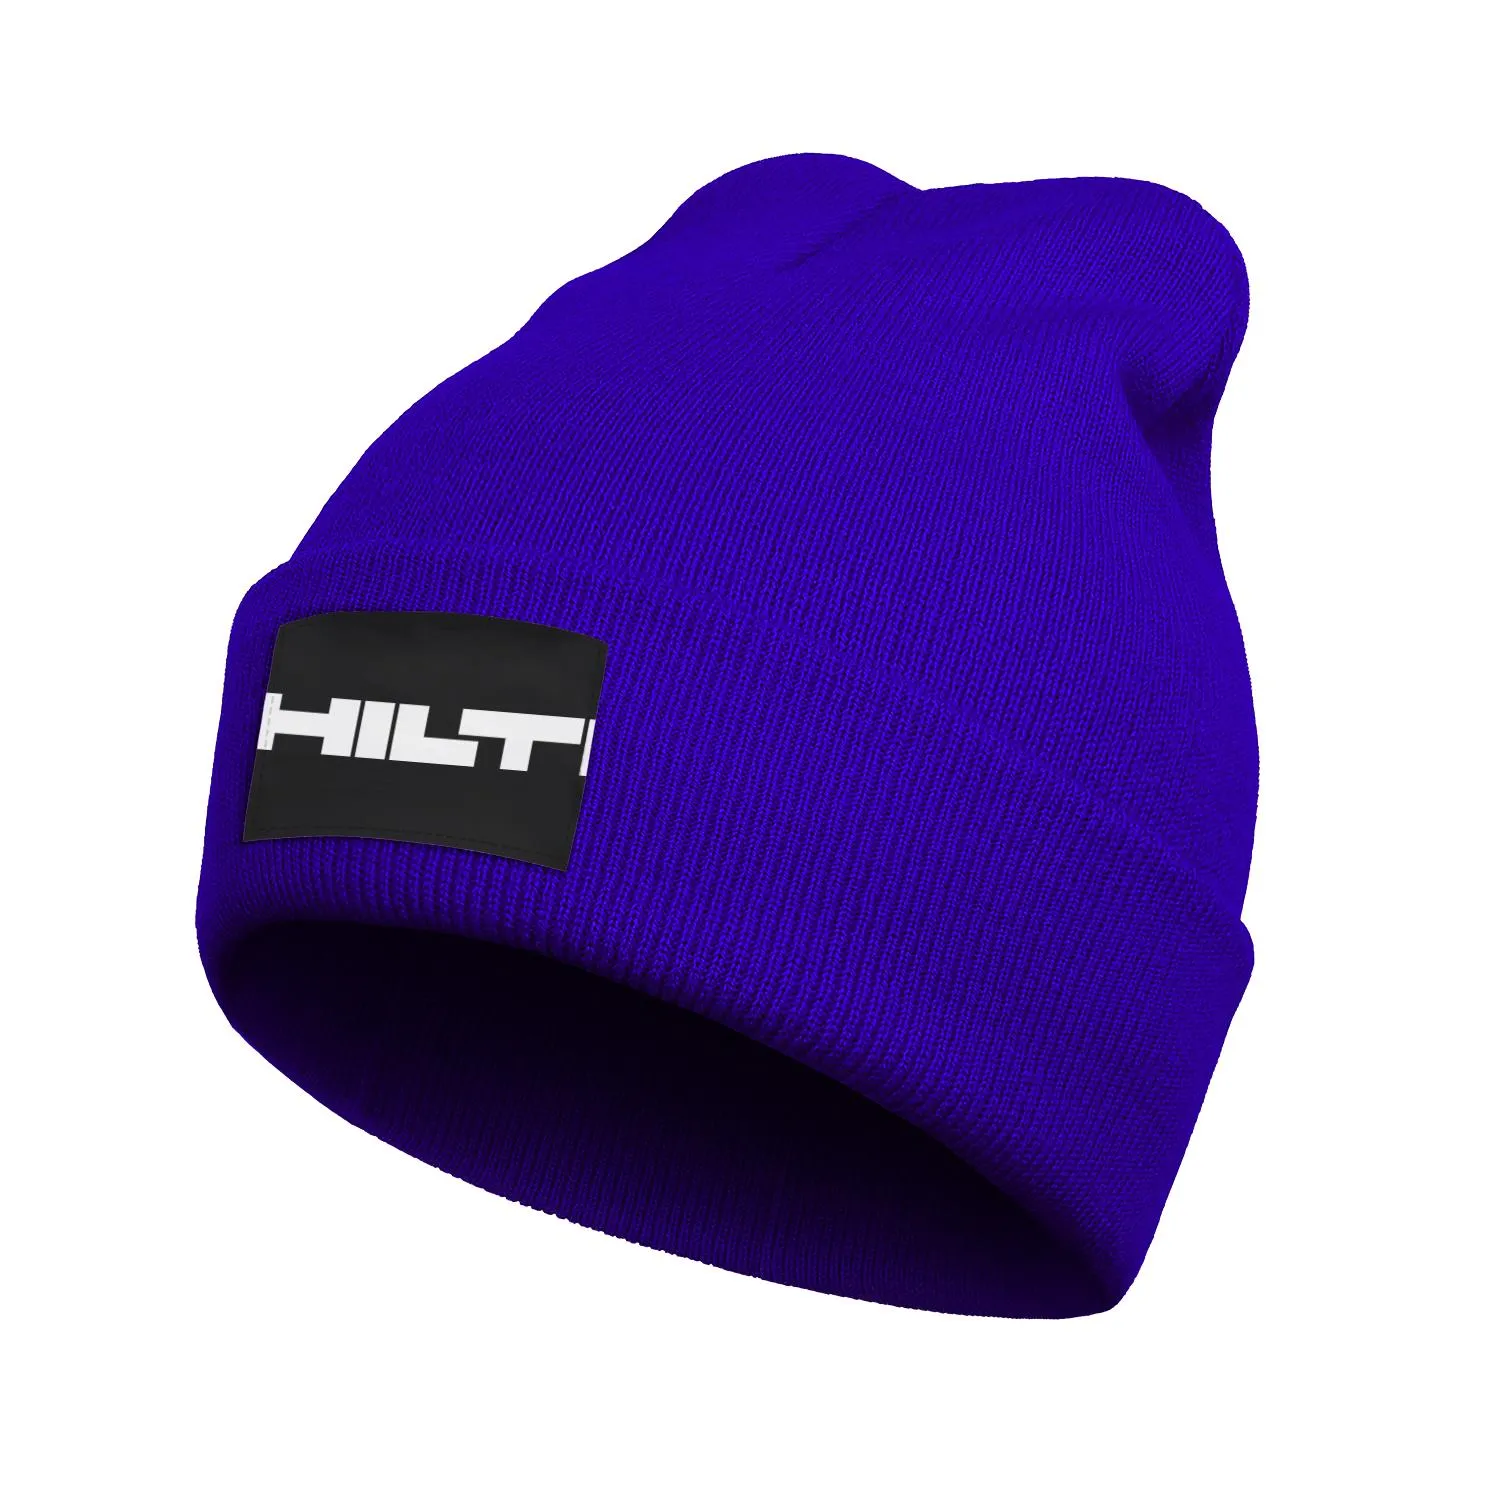 Fashion Hilti AG company Group Tools Winter Ski Beanie Hats Fits Under Helmets Flash gold White marble Vintage old3182595